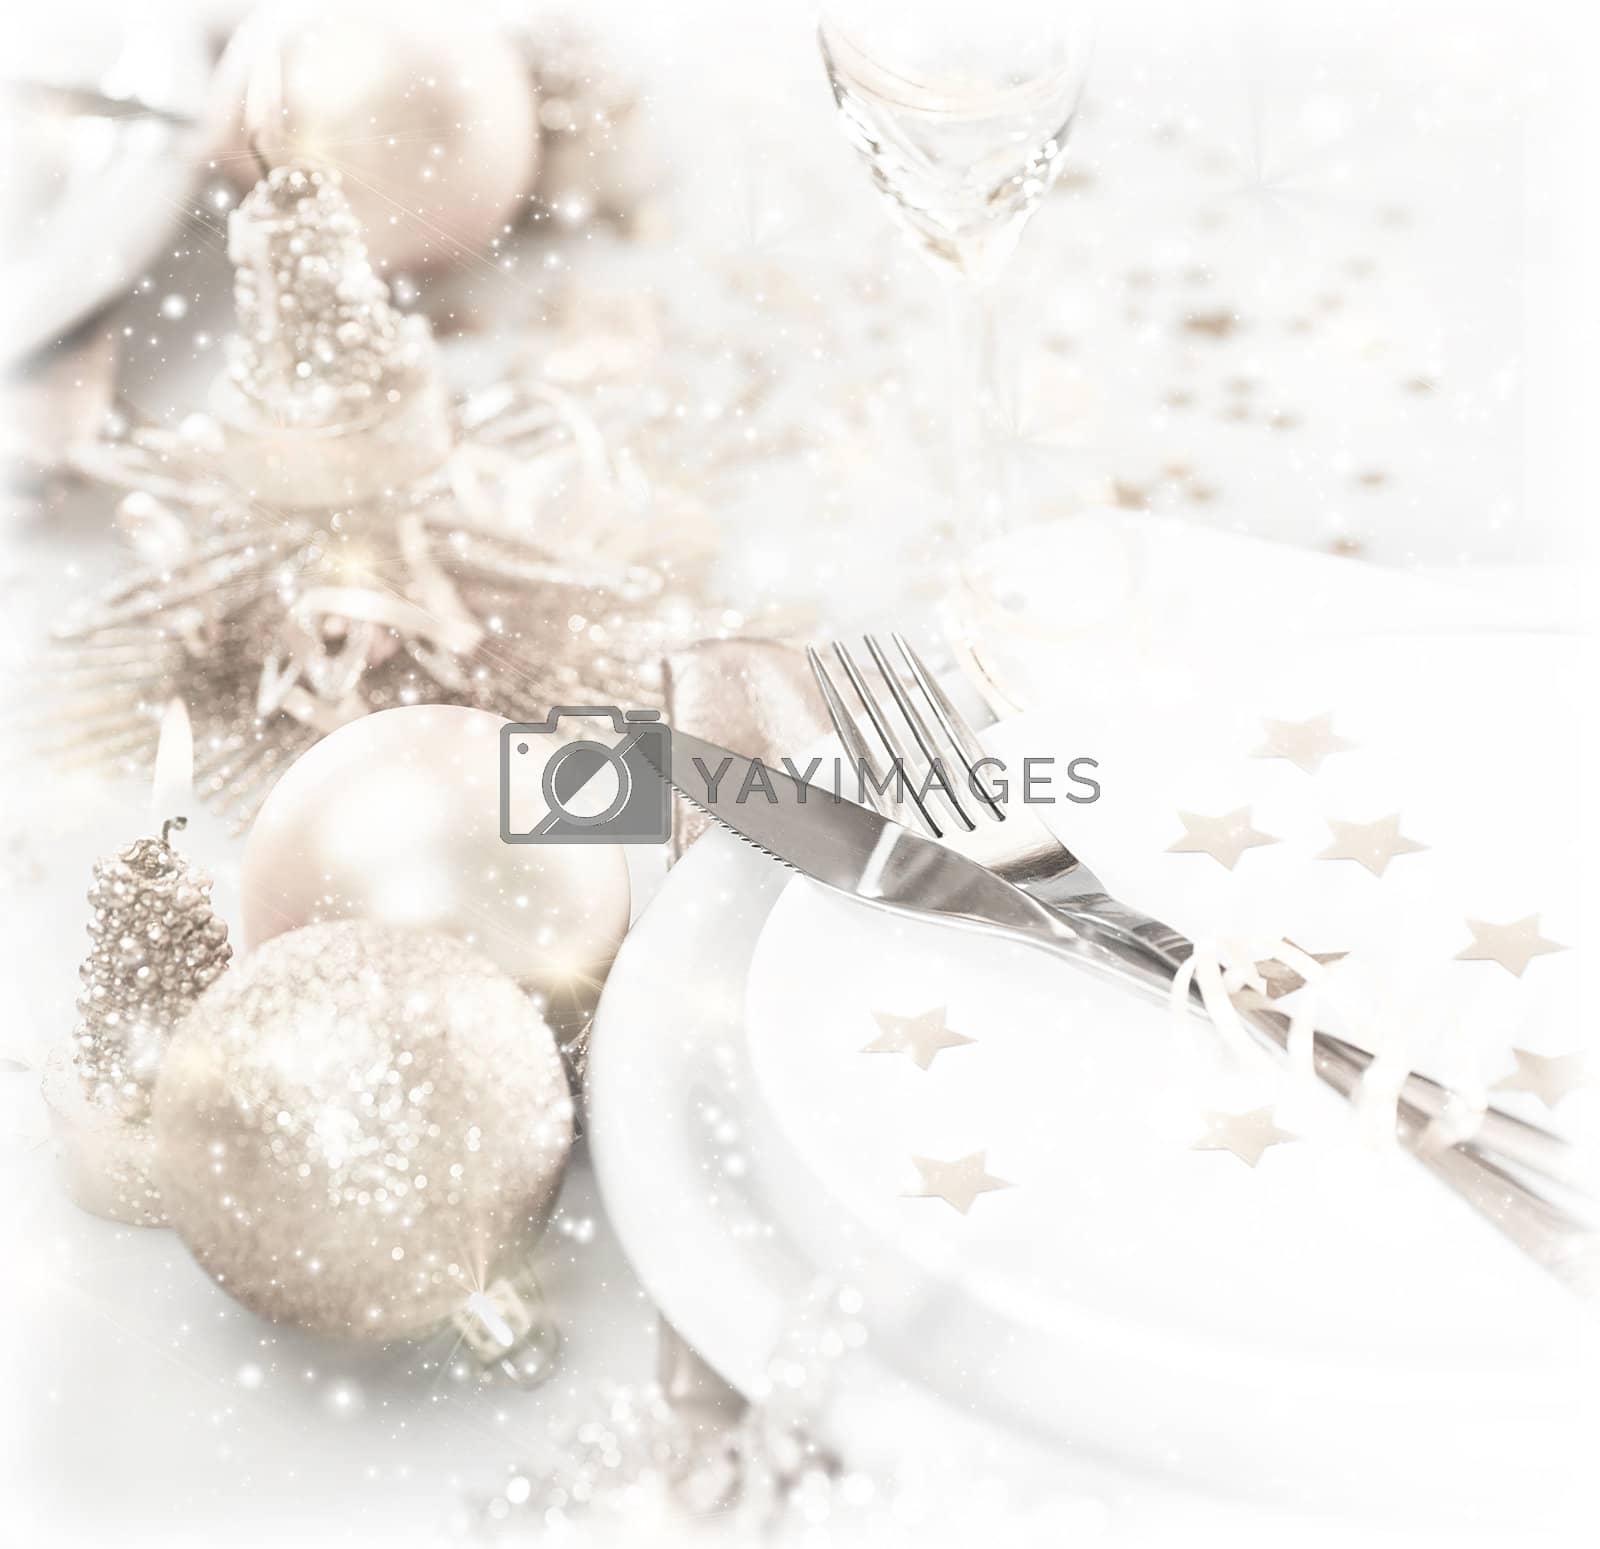 Royalty free image of Festive table setting by Anna_Omelchenko